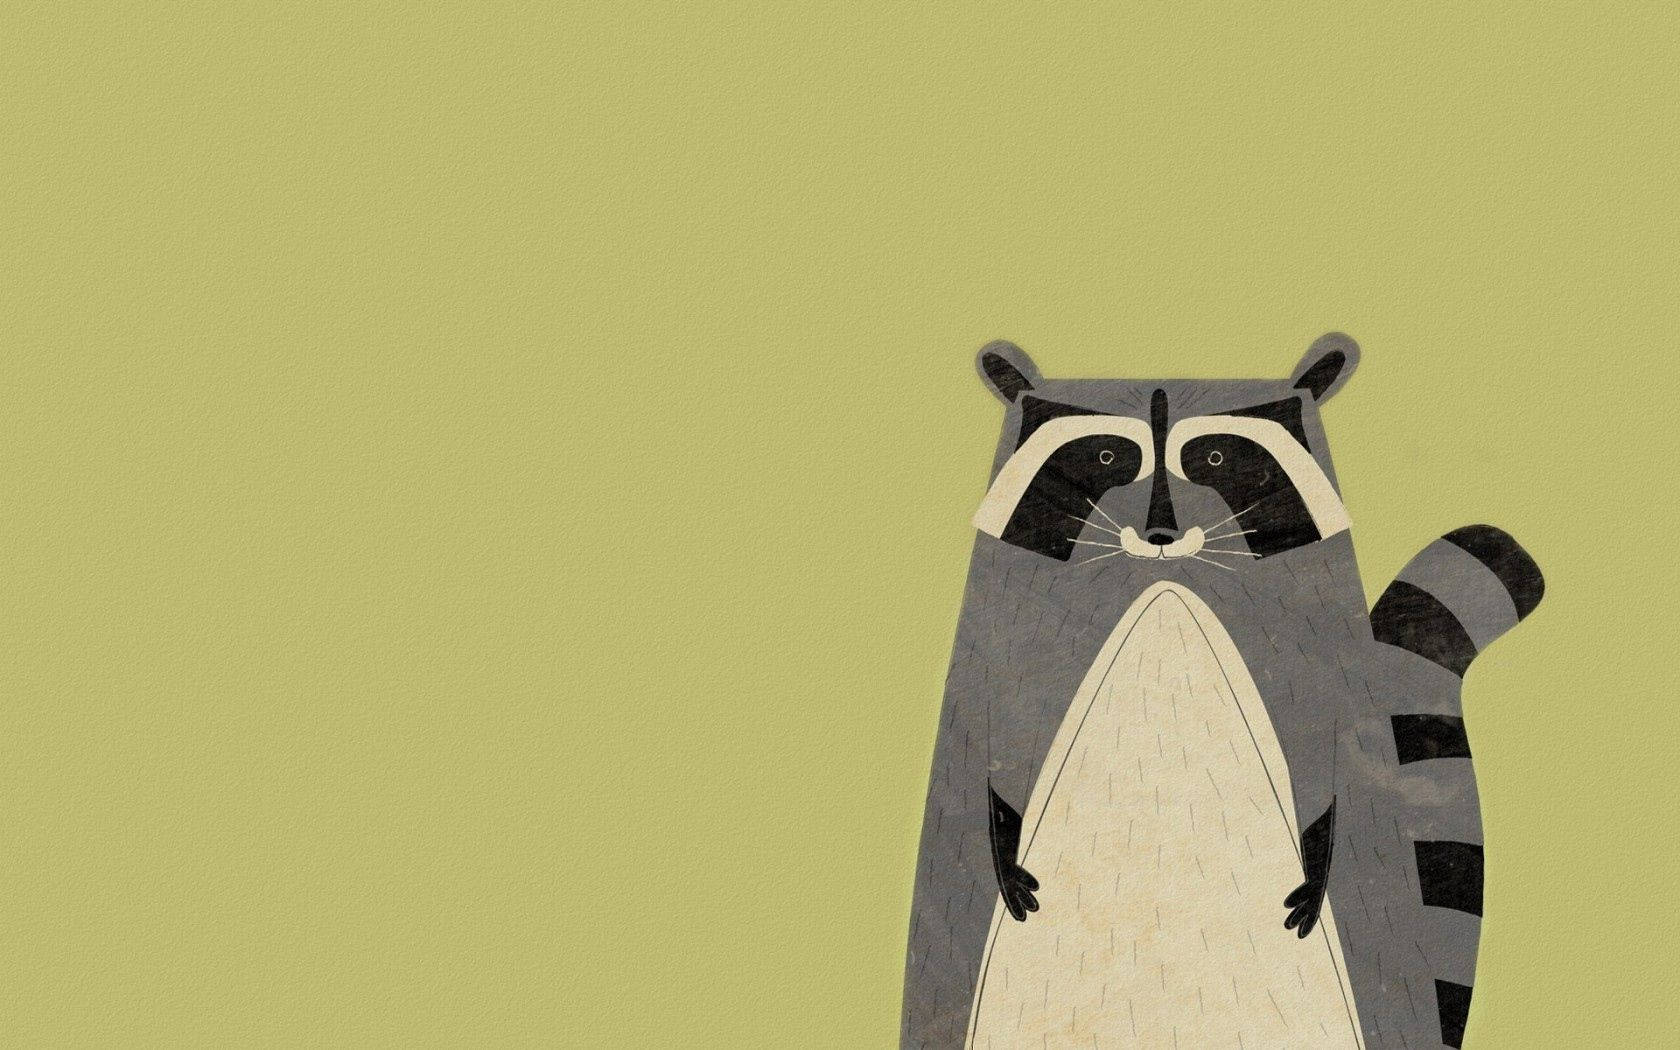 This Cute Animated Racoon Is Out Exploring The World. Background